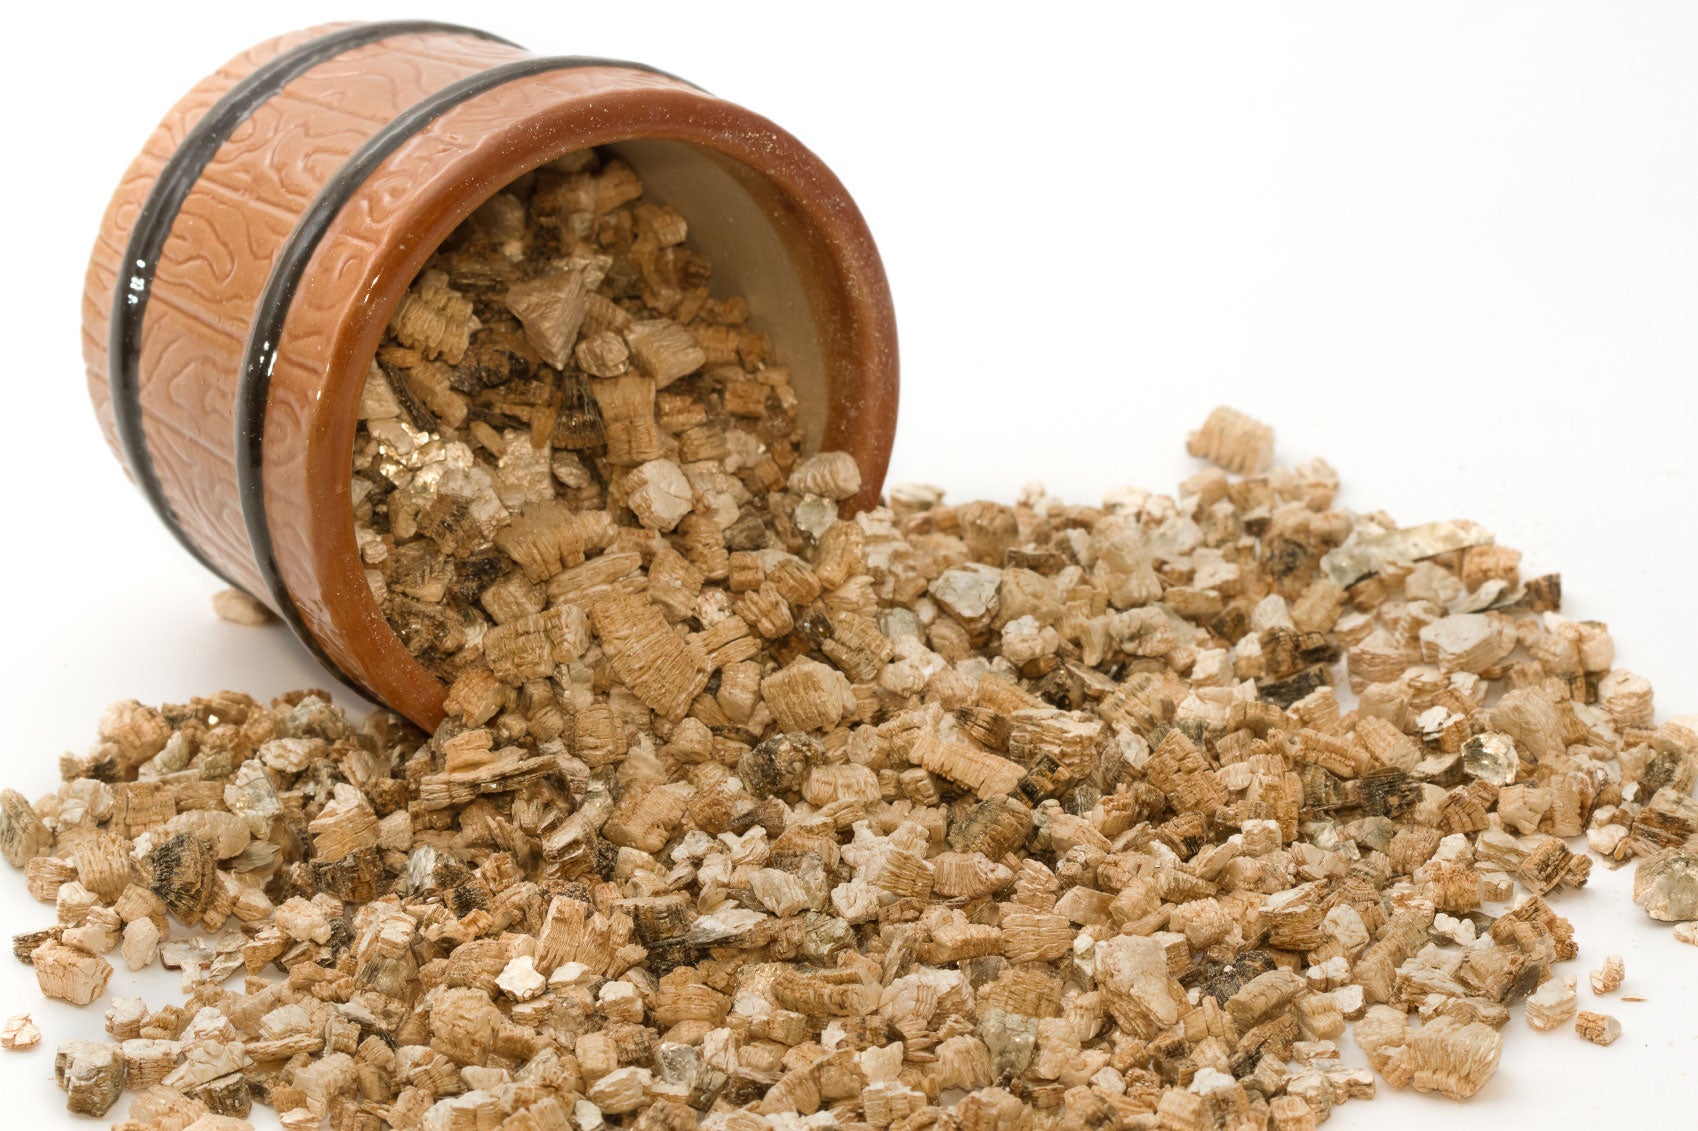 Gardening With Vermiculite - Vermiculite Uses And Information